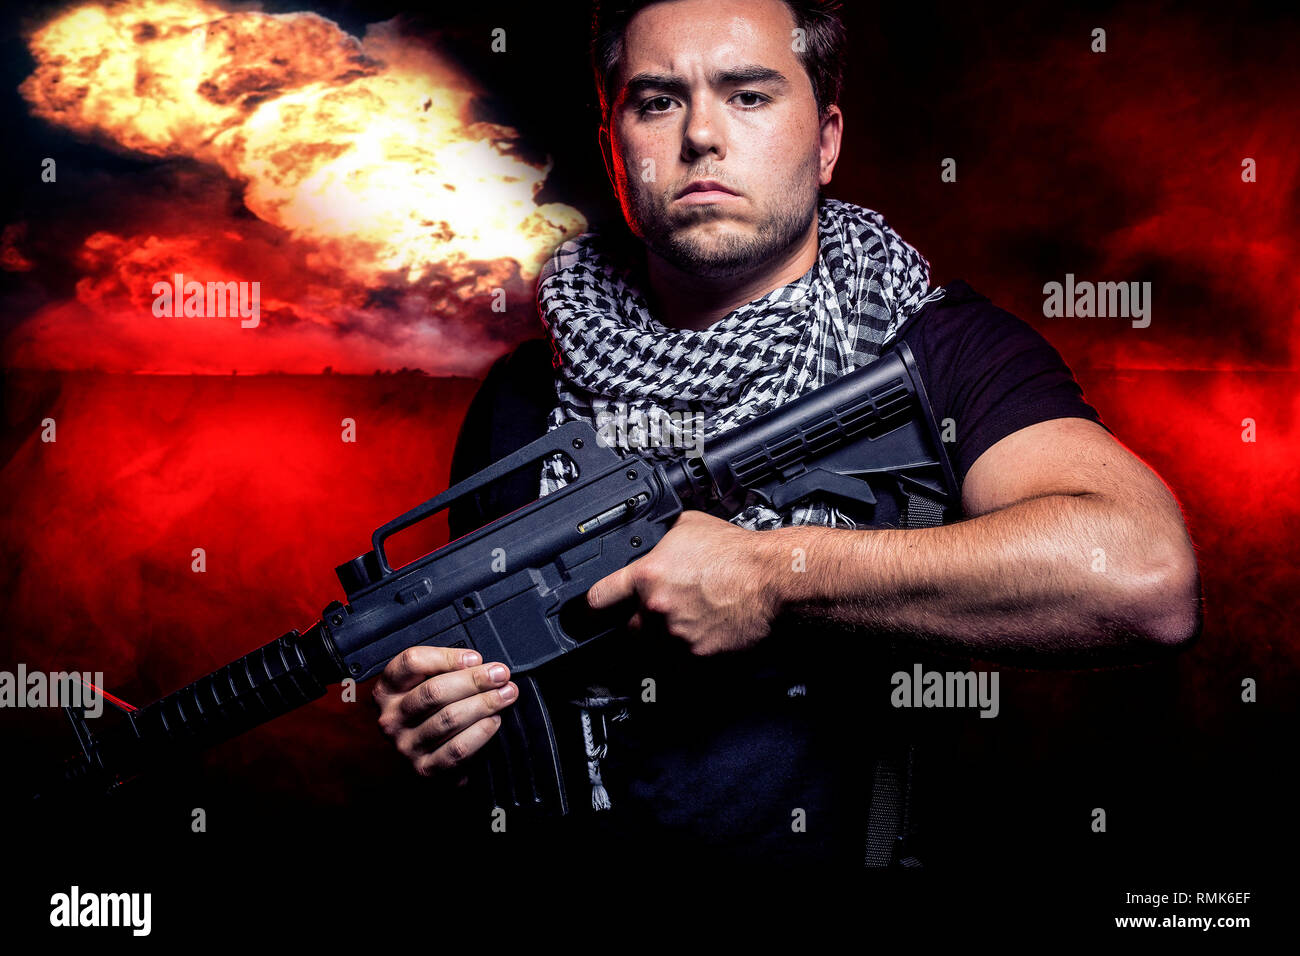 Soldier with a gun surviving bombs that are weapons of mass destruction or a nuclear war. The image depicts warfare and apocalyptic WW3. Stock Photo